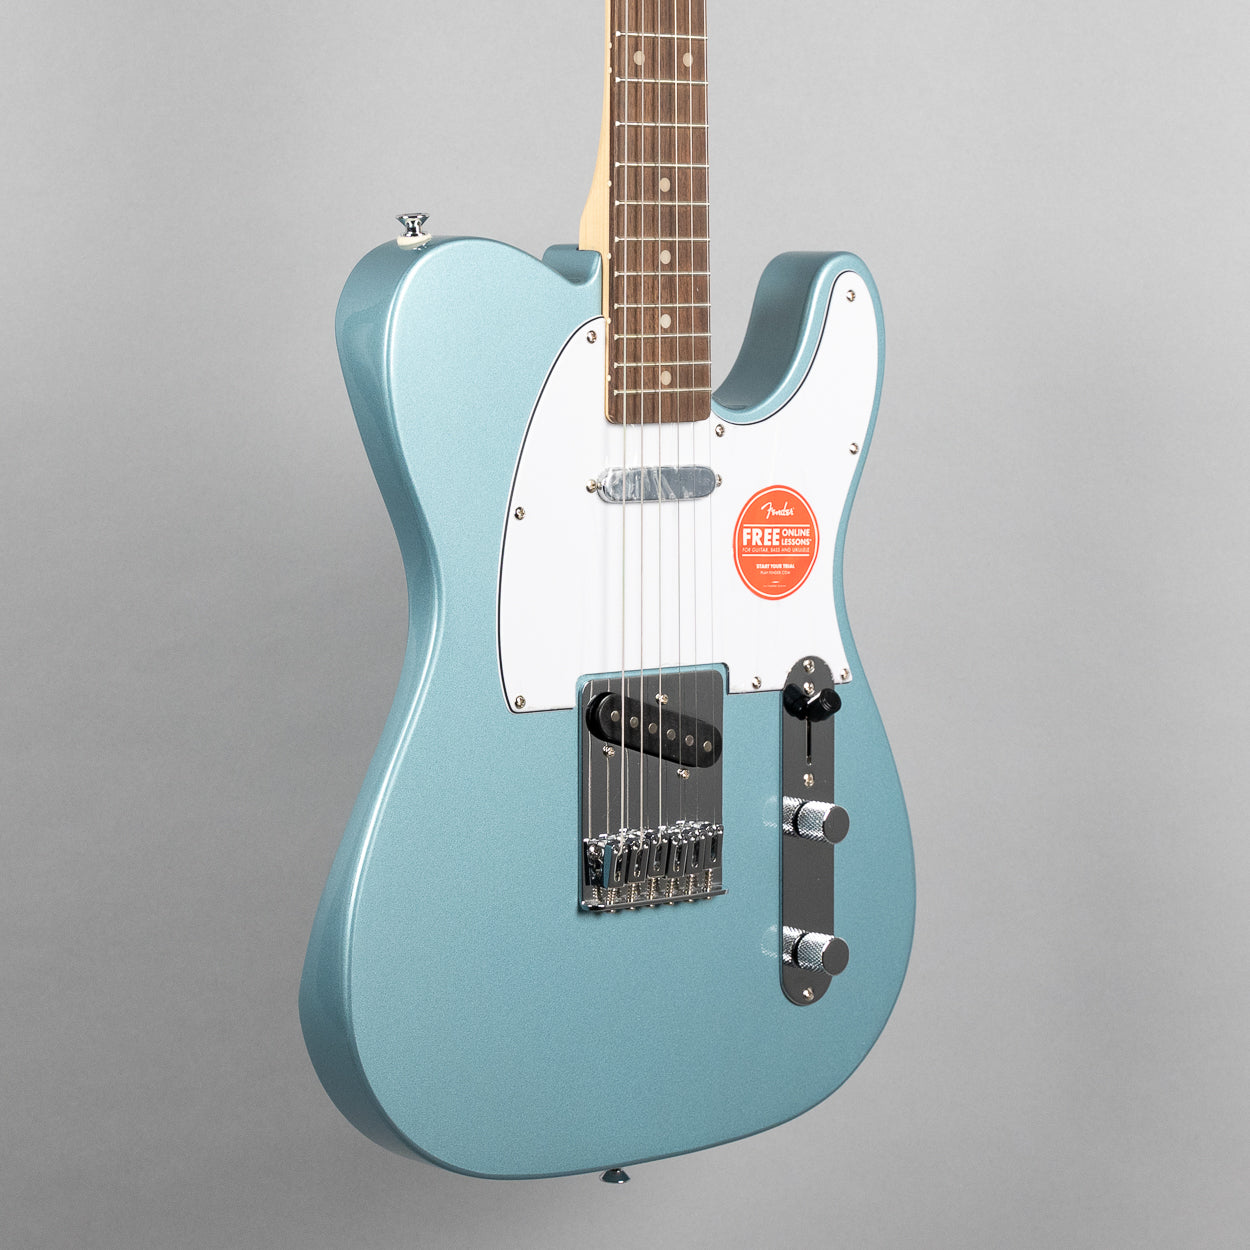 Squier Affinity Series Telecaster in Ice Blue Metallic